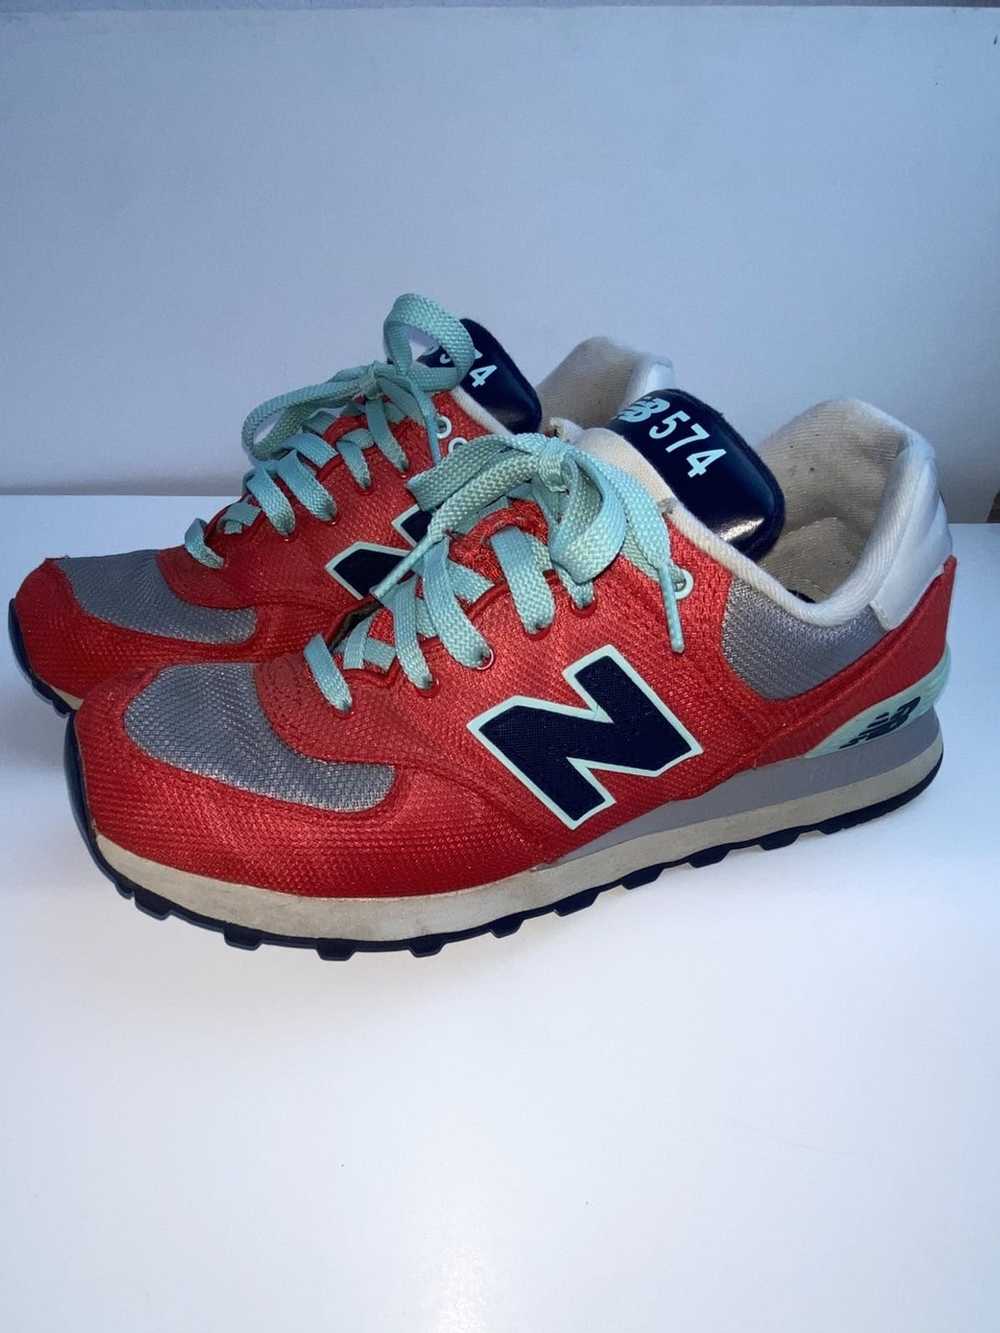 New Balance New Balance 574 Econ red teal shoes - image 12